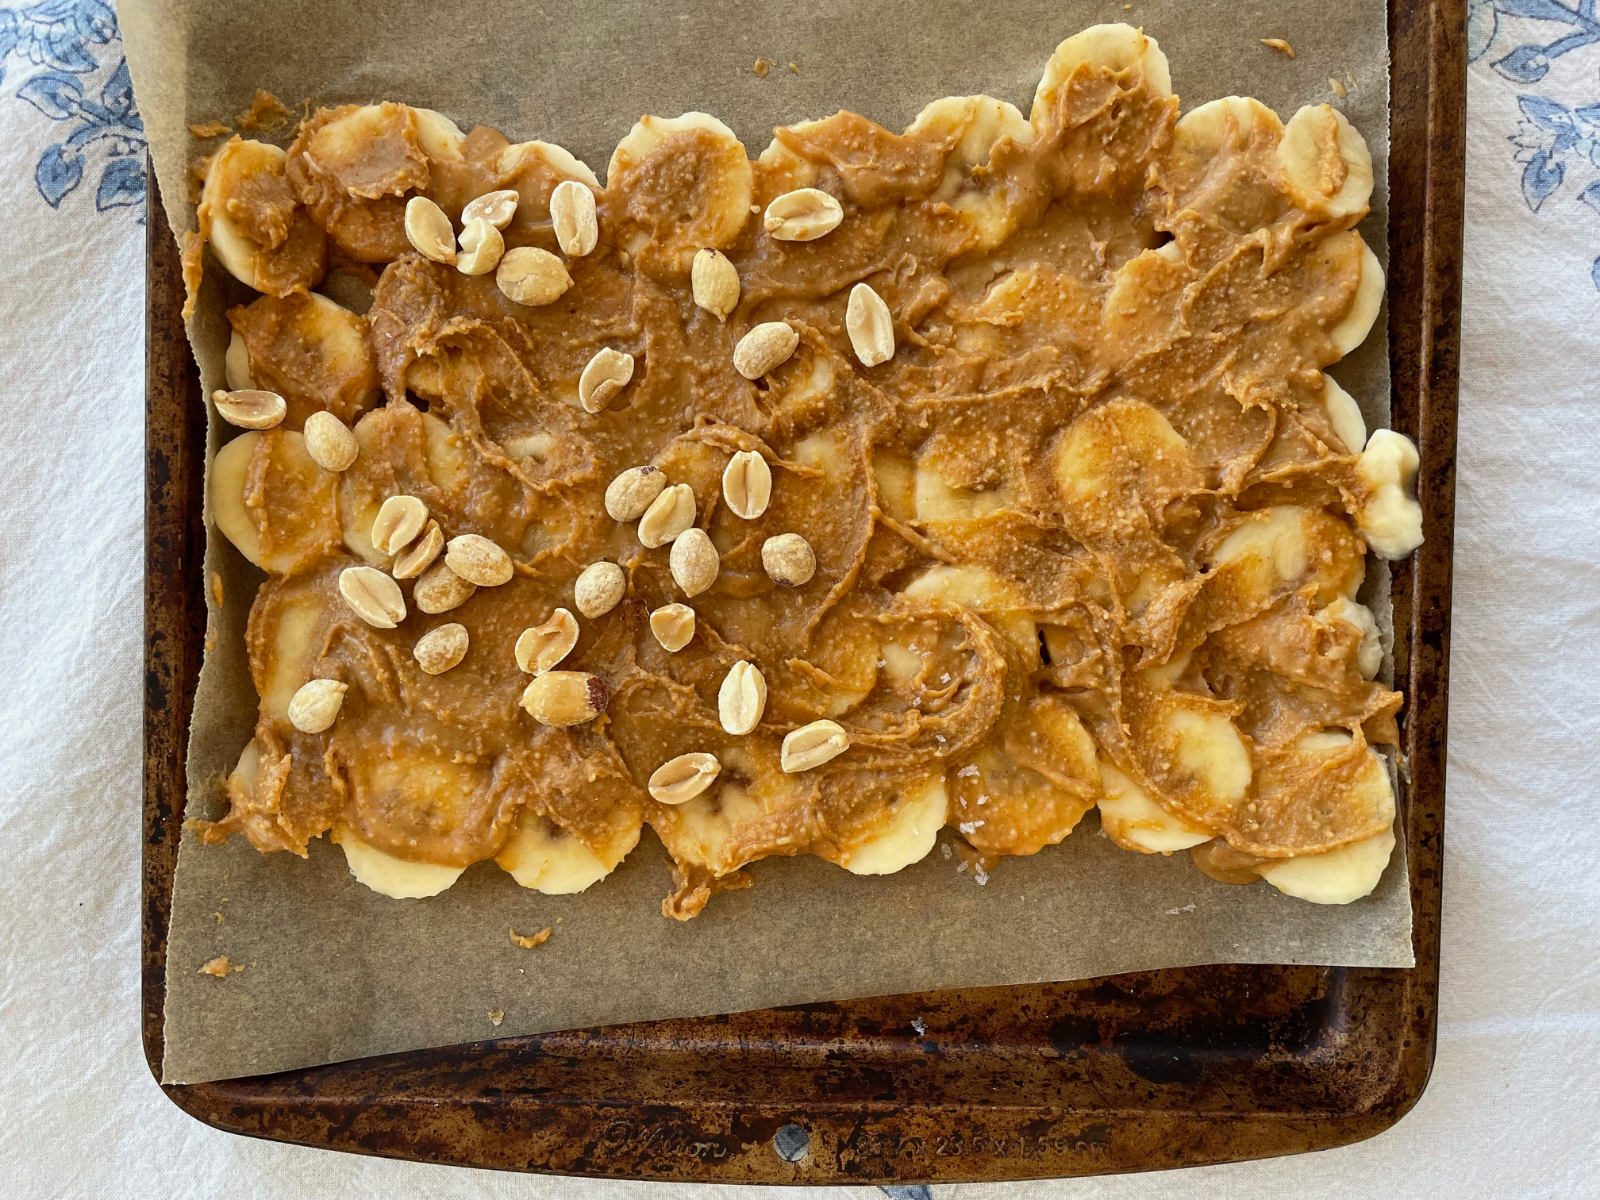 spreading out banana slices and peanut butter for banana bark